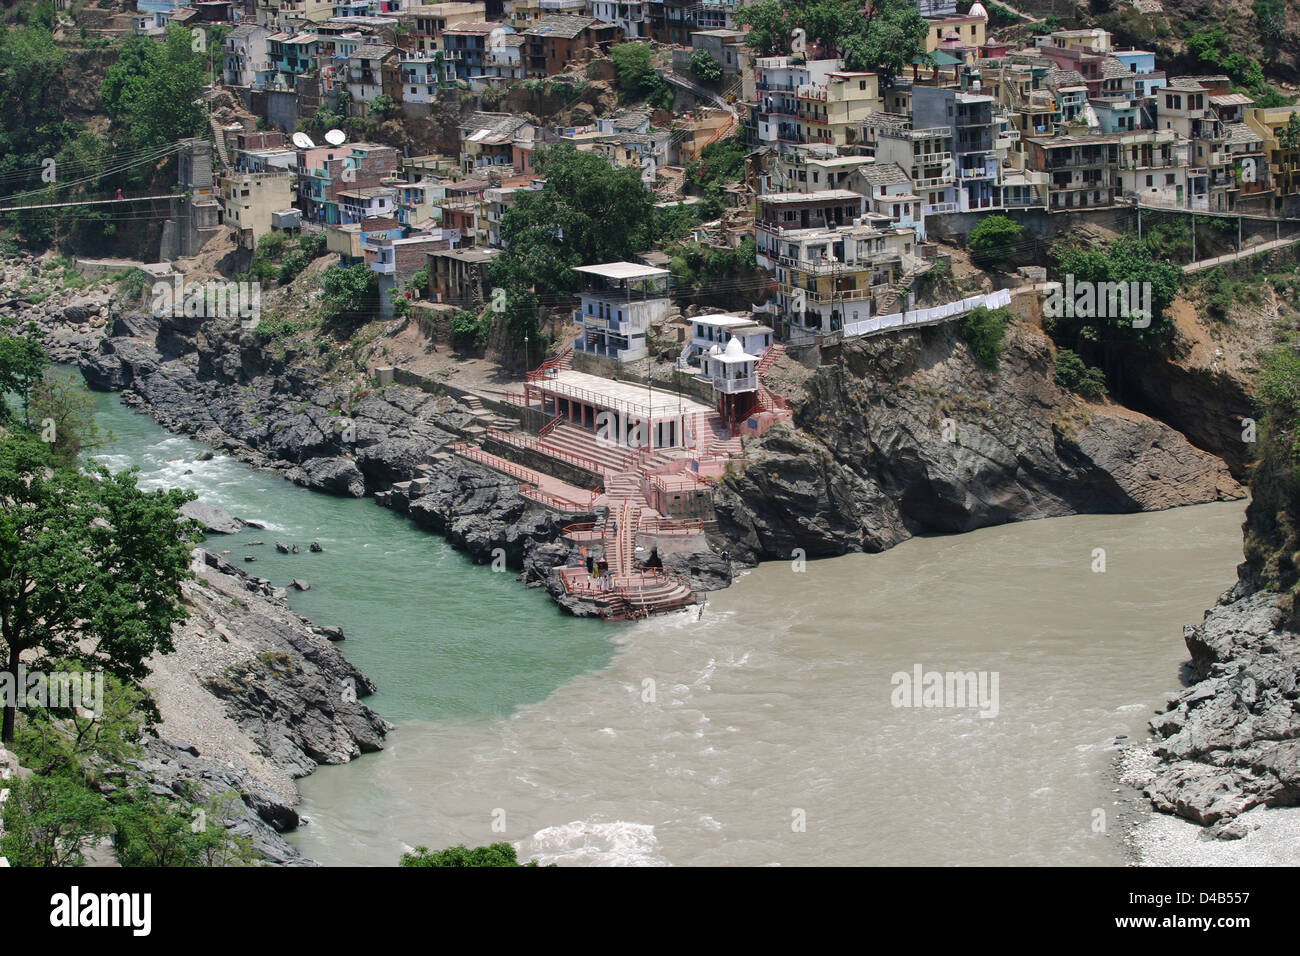 Devprayag is the confluence of the Bhagirathi and Aneknanda Rivers, which become the Ganges. Stock Photo